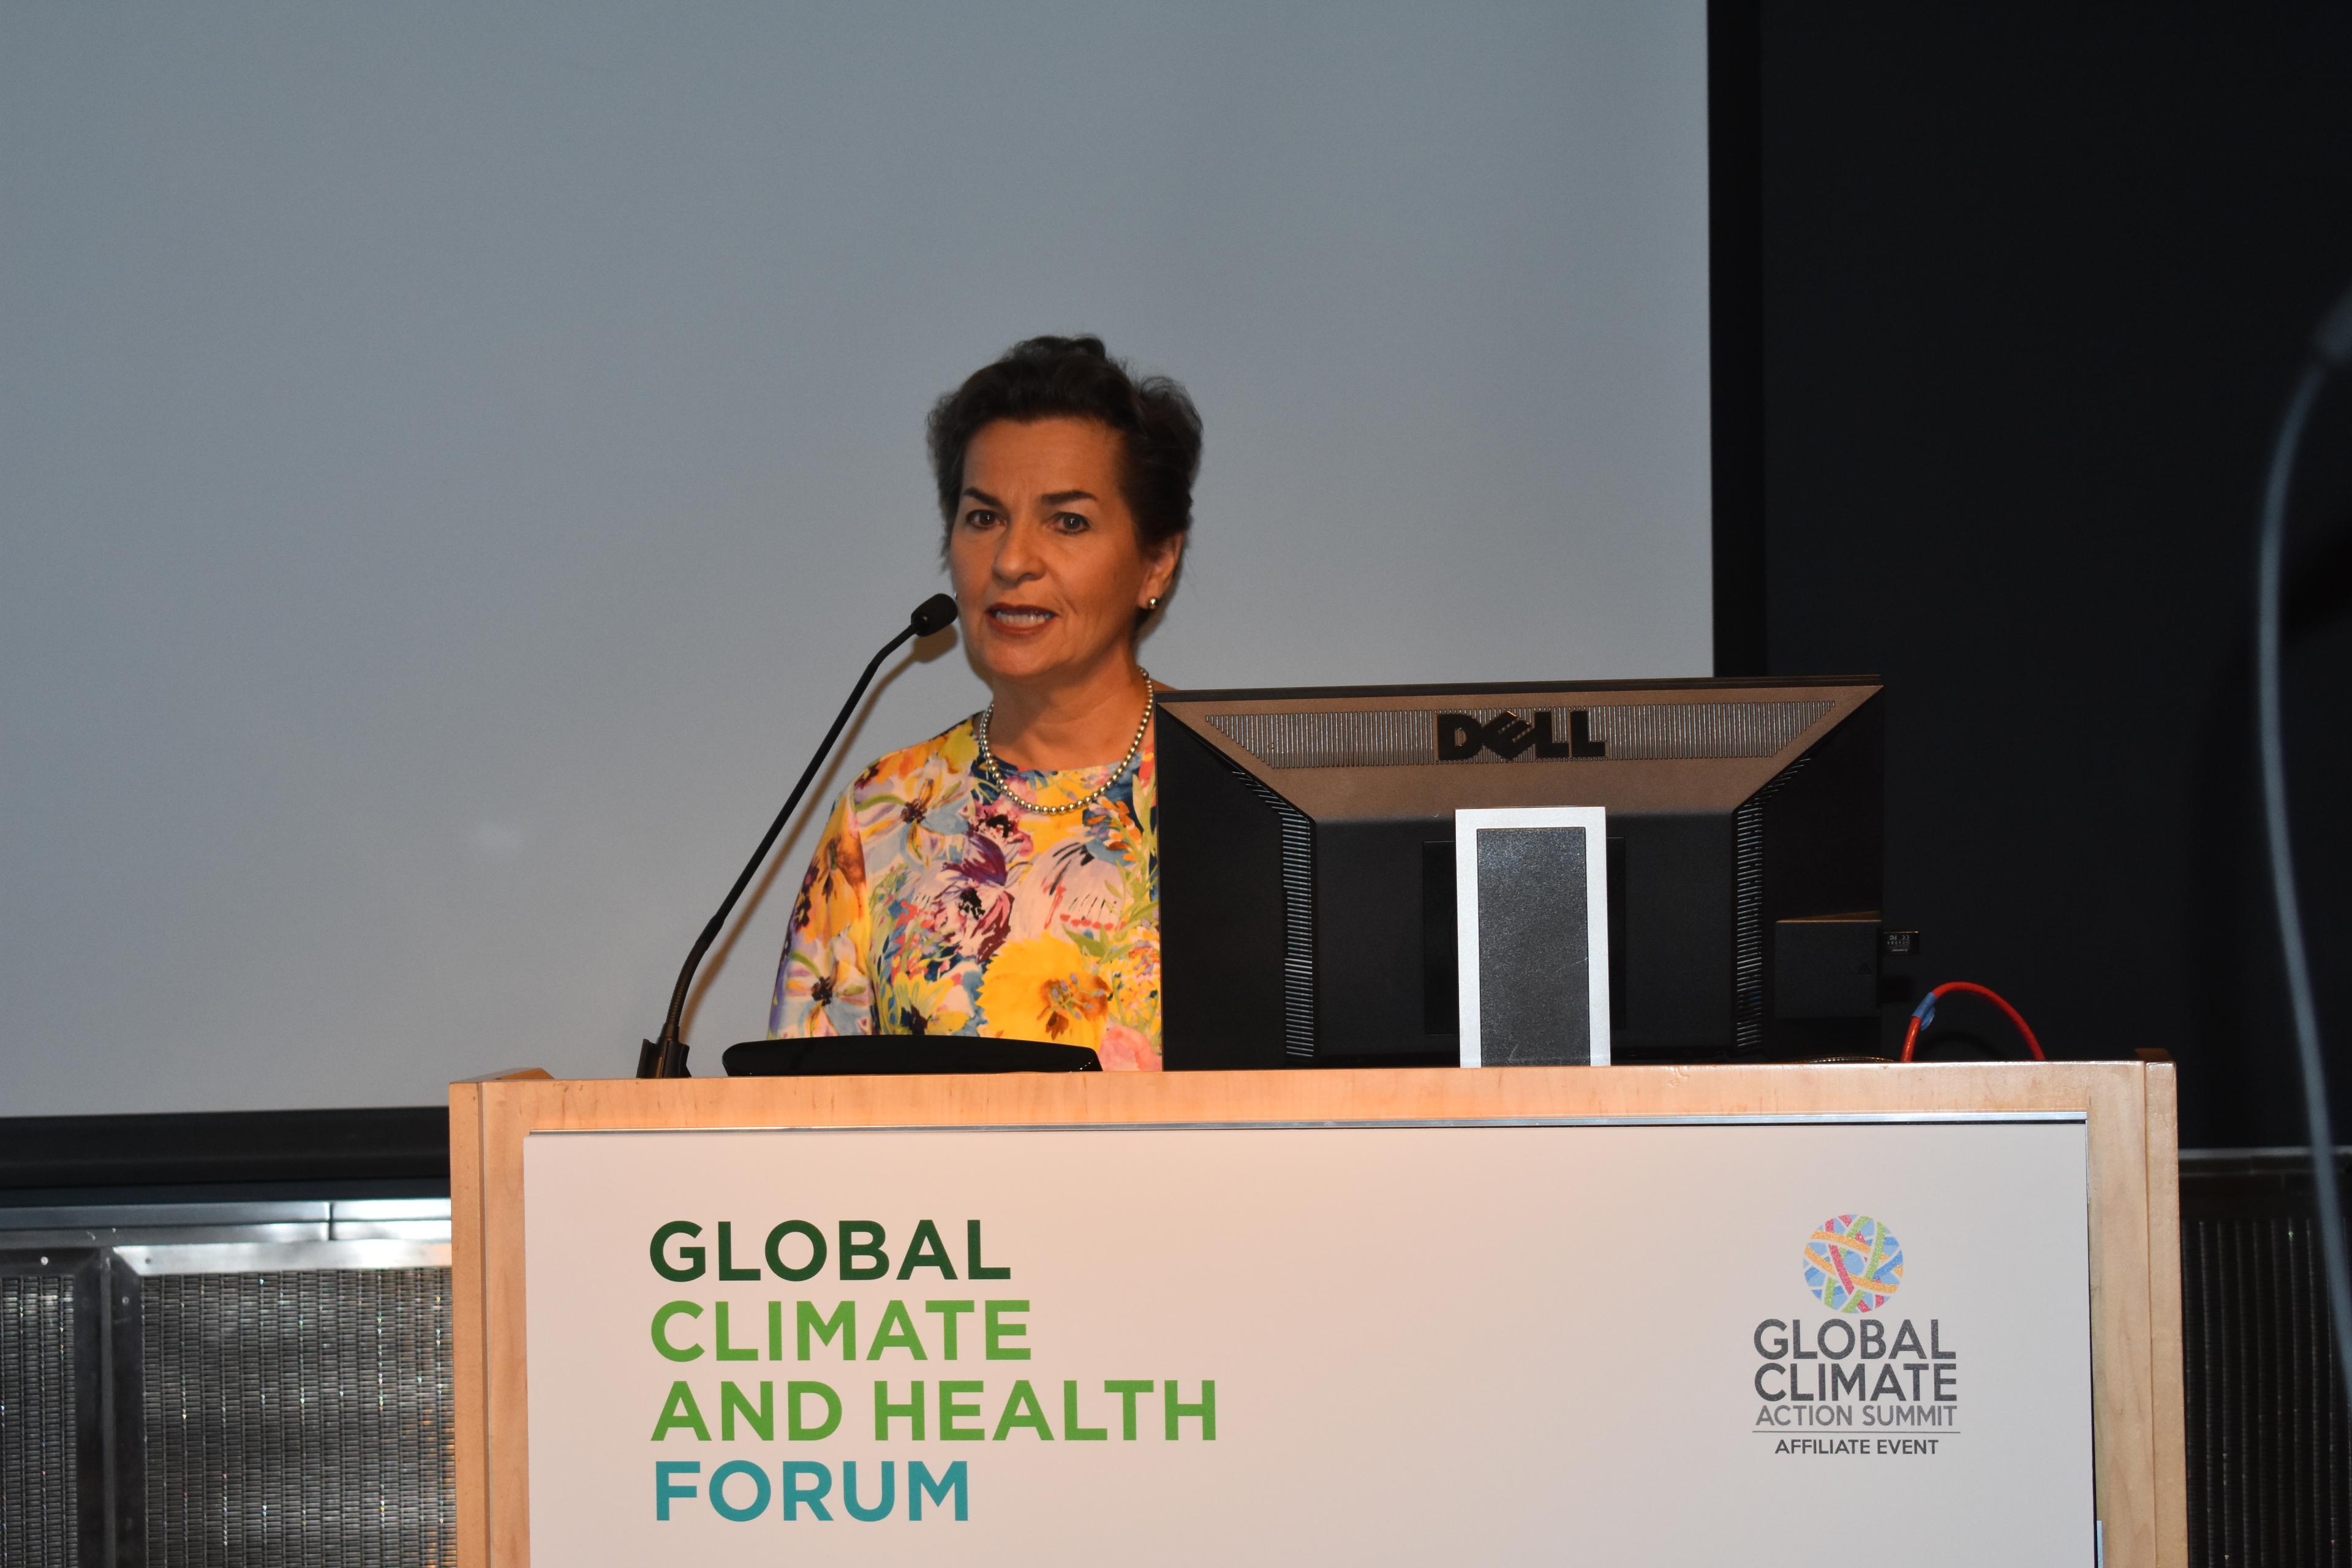 Christiana Figueras at the Global Climate and Health Forum at UCSF Mission Bay